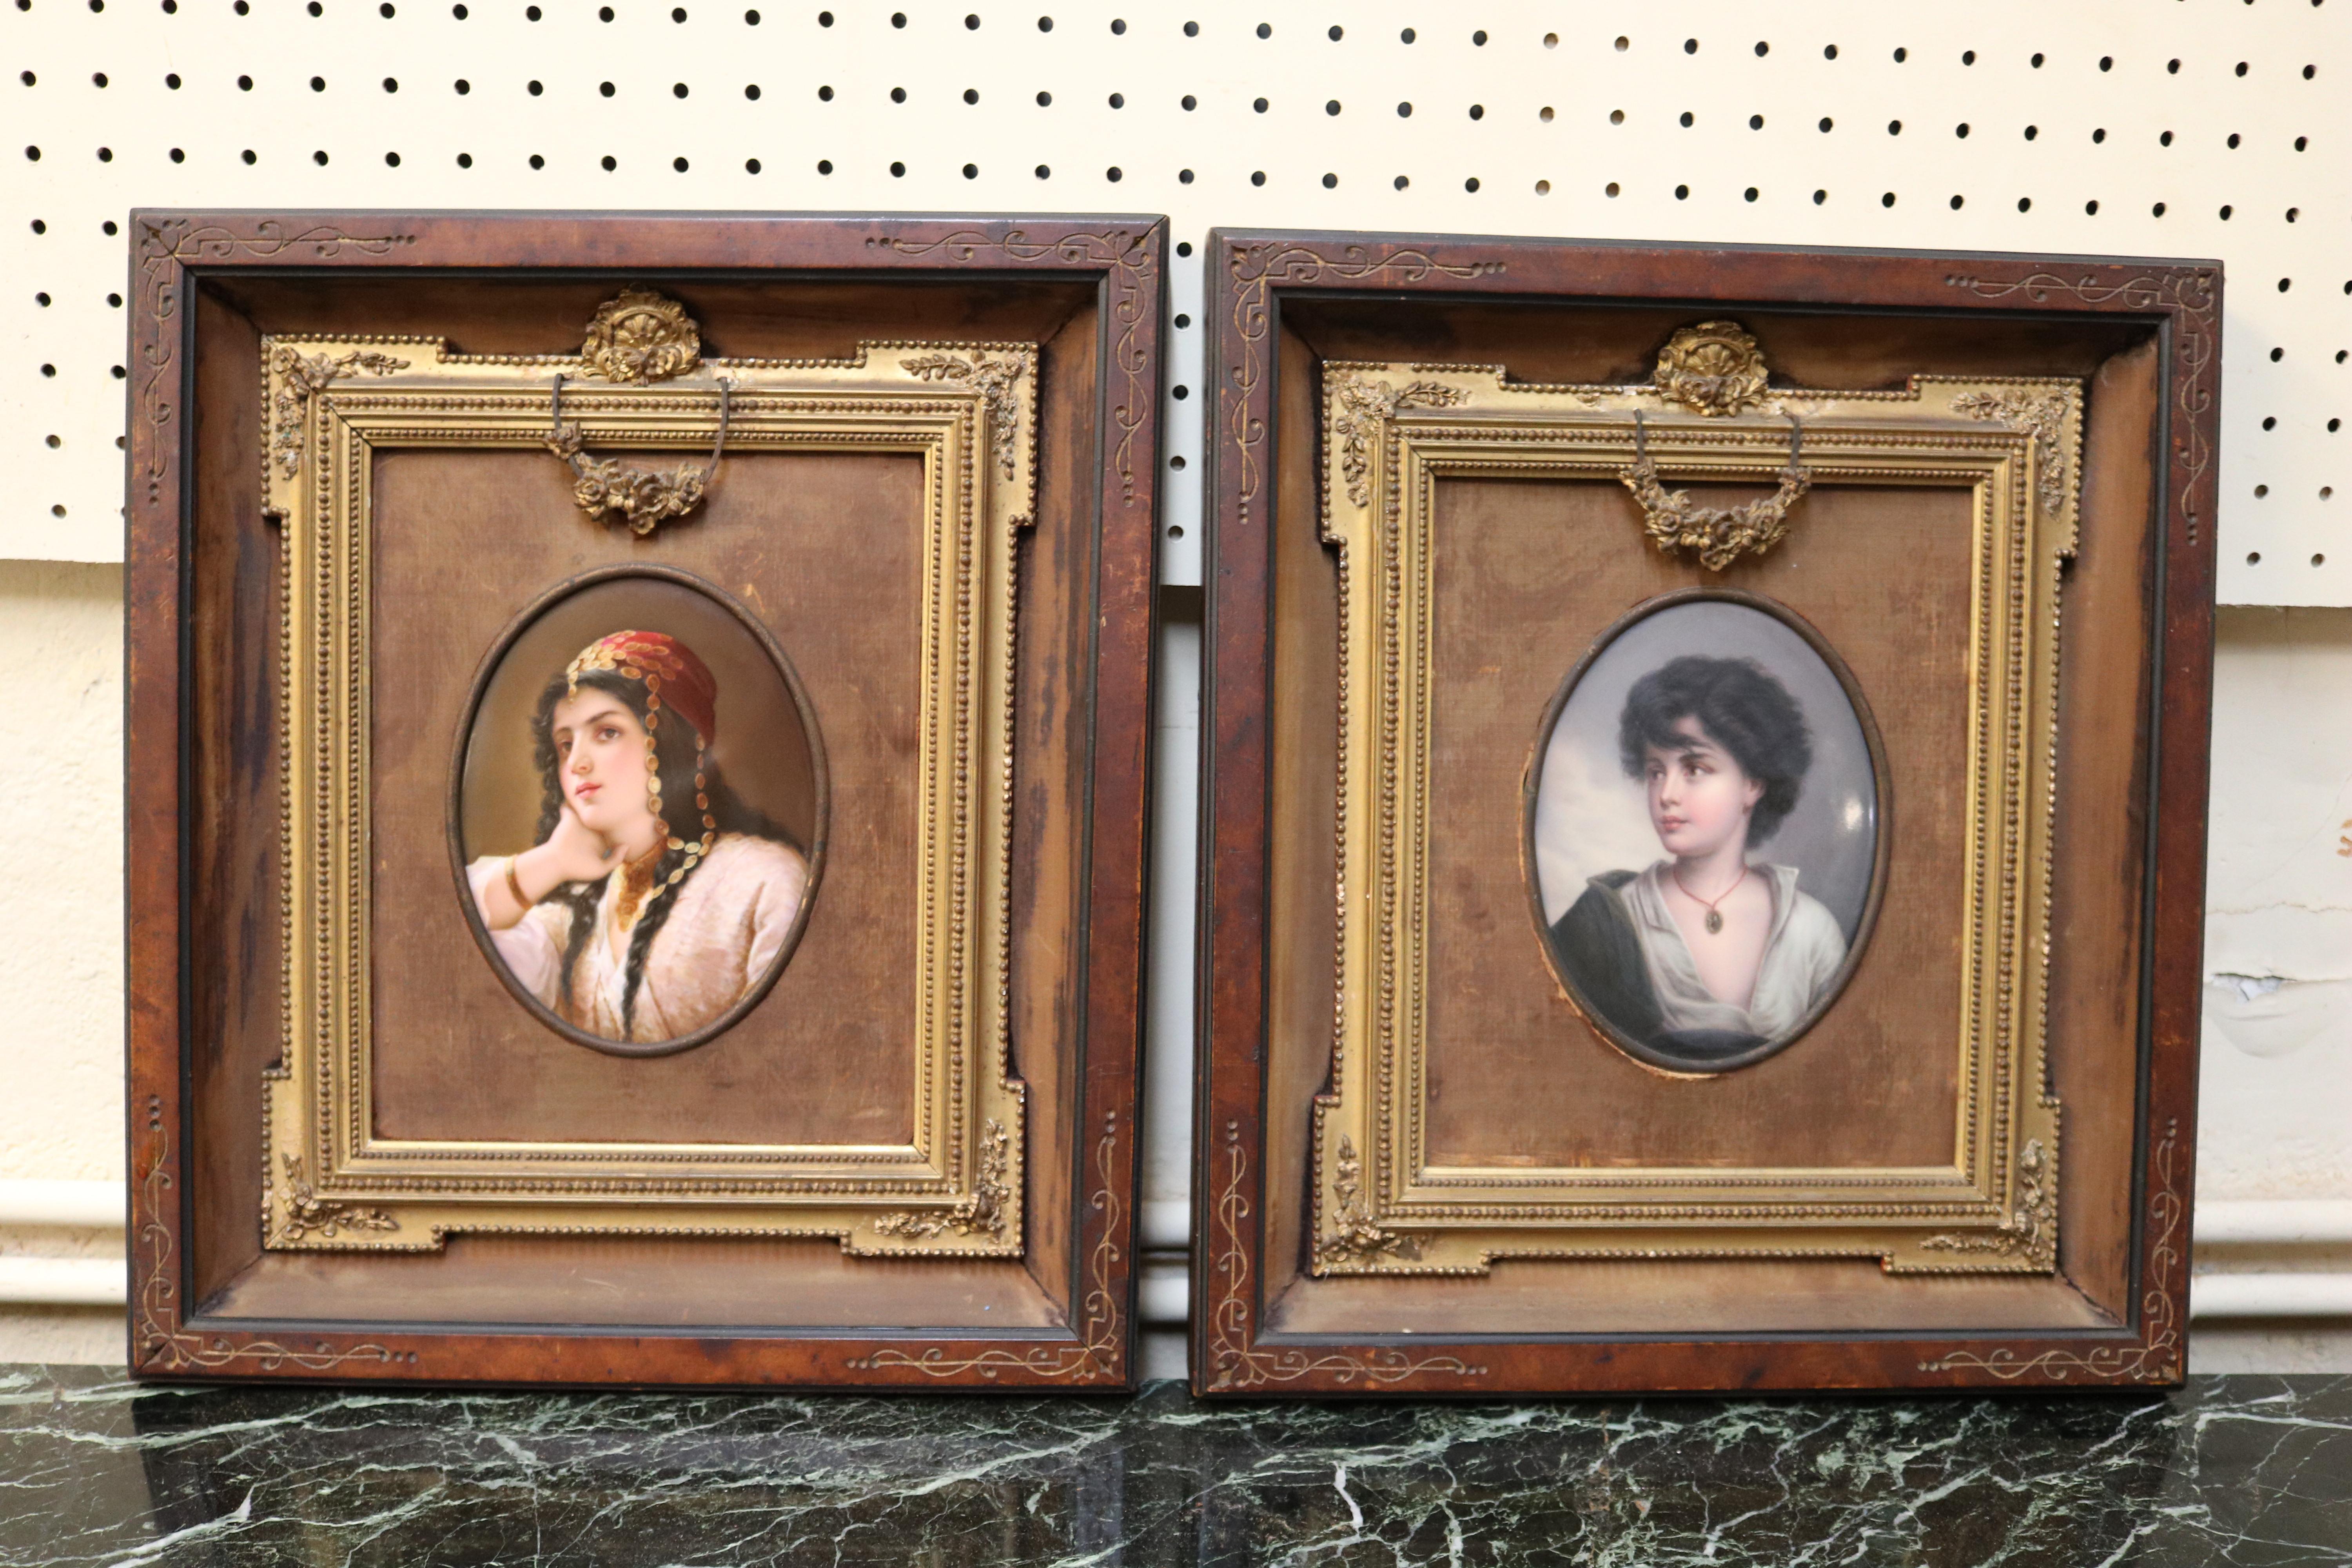 19th Century Pair of KPM Attributed Porcelain Painted Plaques of Woman & Boy

Dimensions : Frame - 16